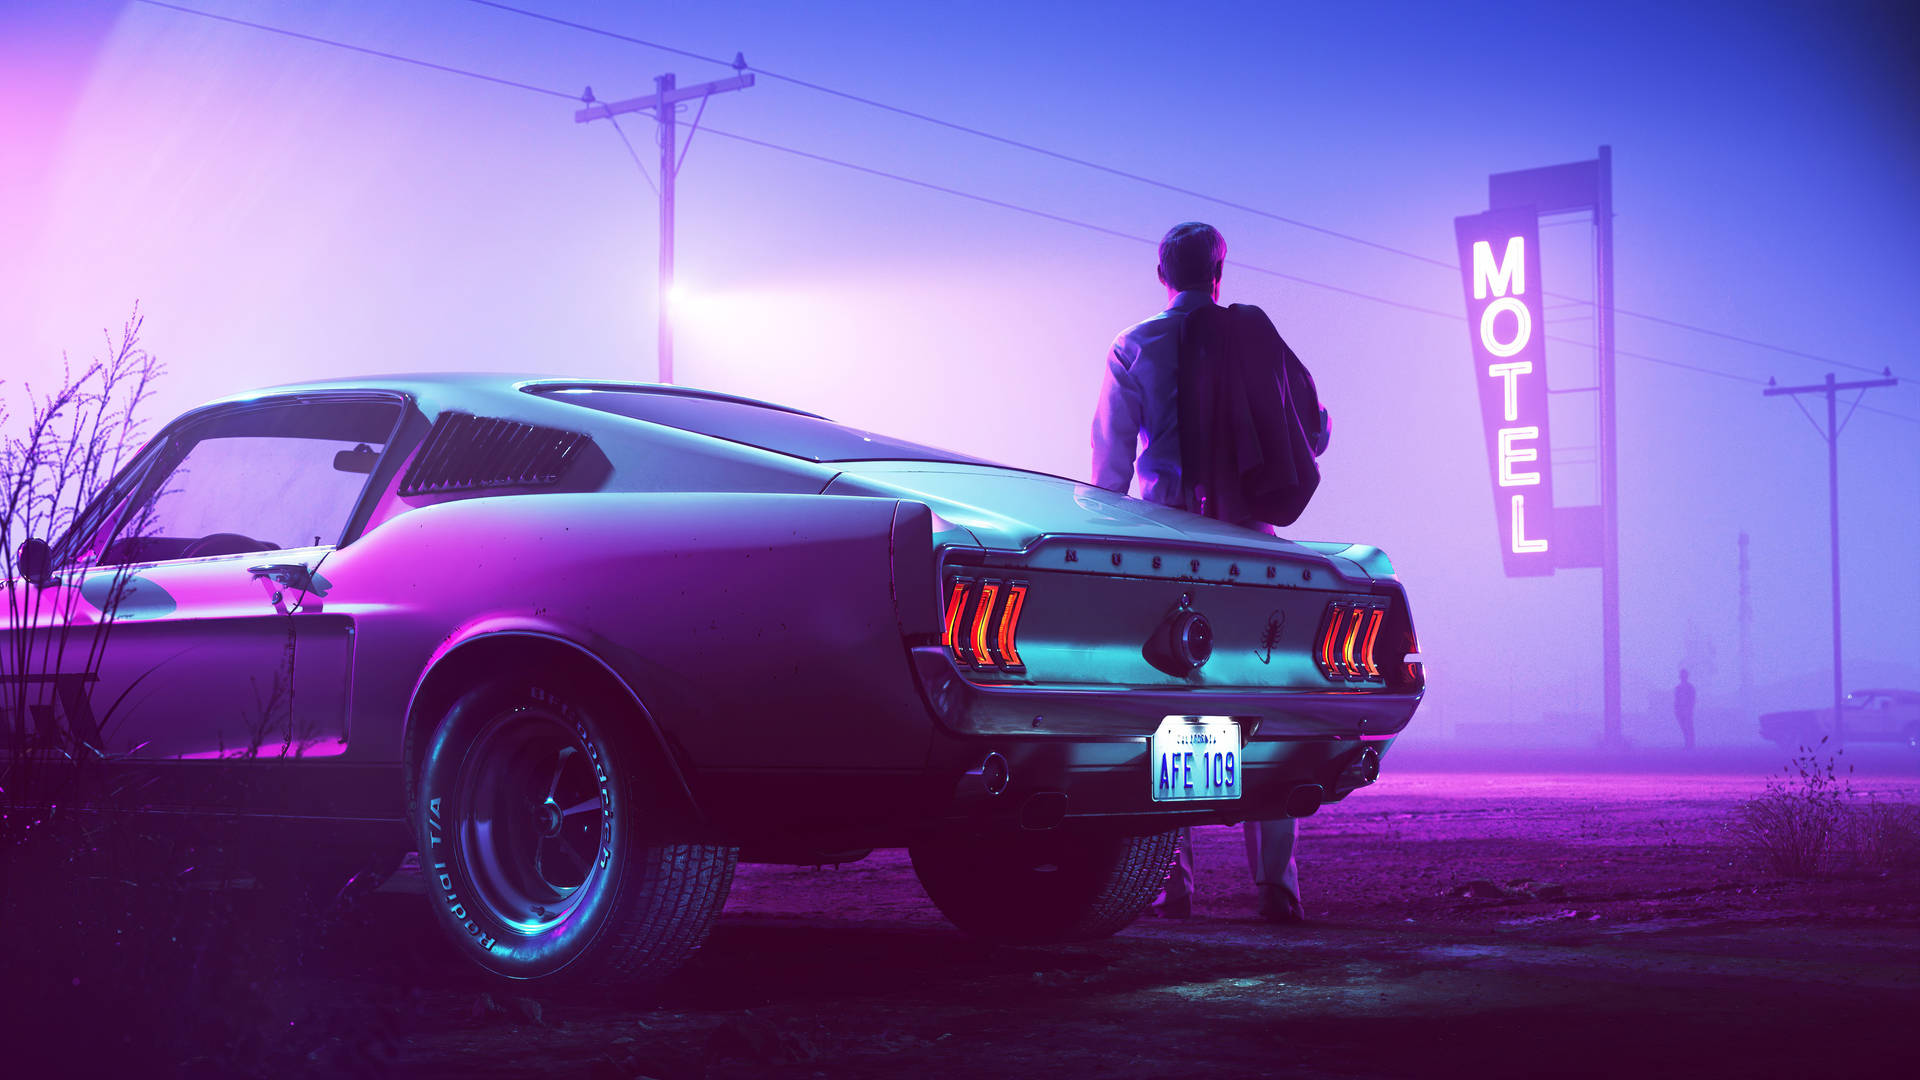 Neon Purple Aesthetic Ford Mustang Background